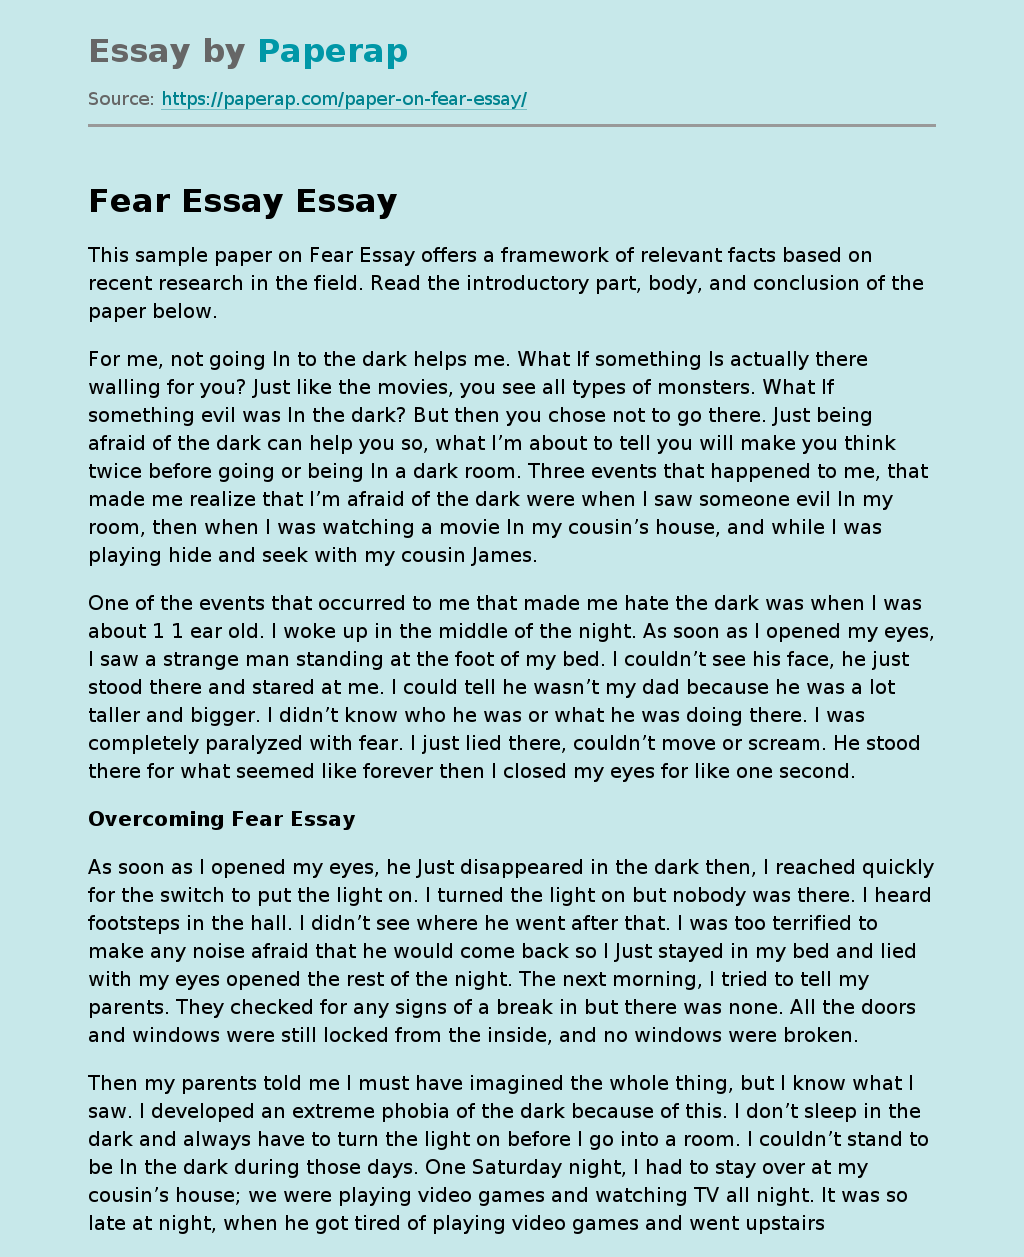 Fear Essay: A Framework of Relevant Facts